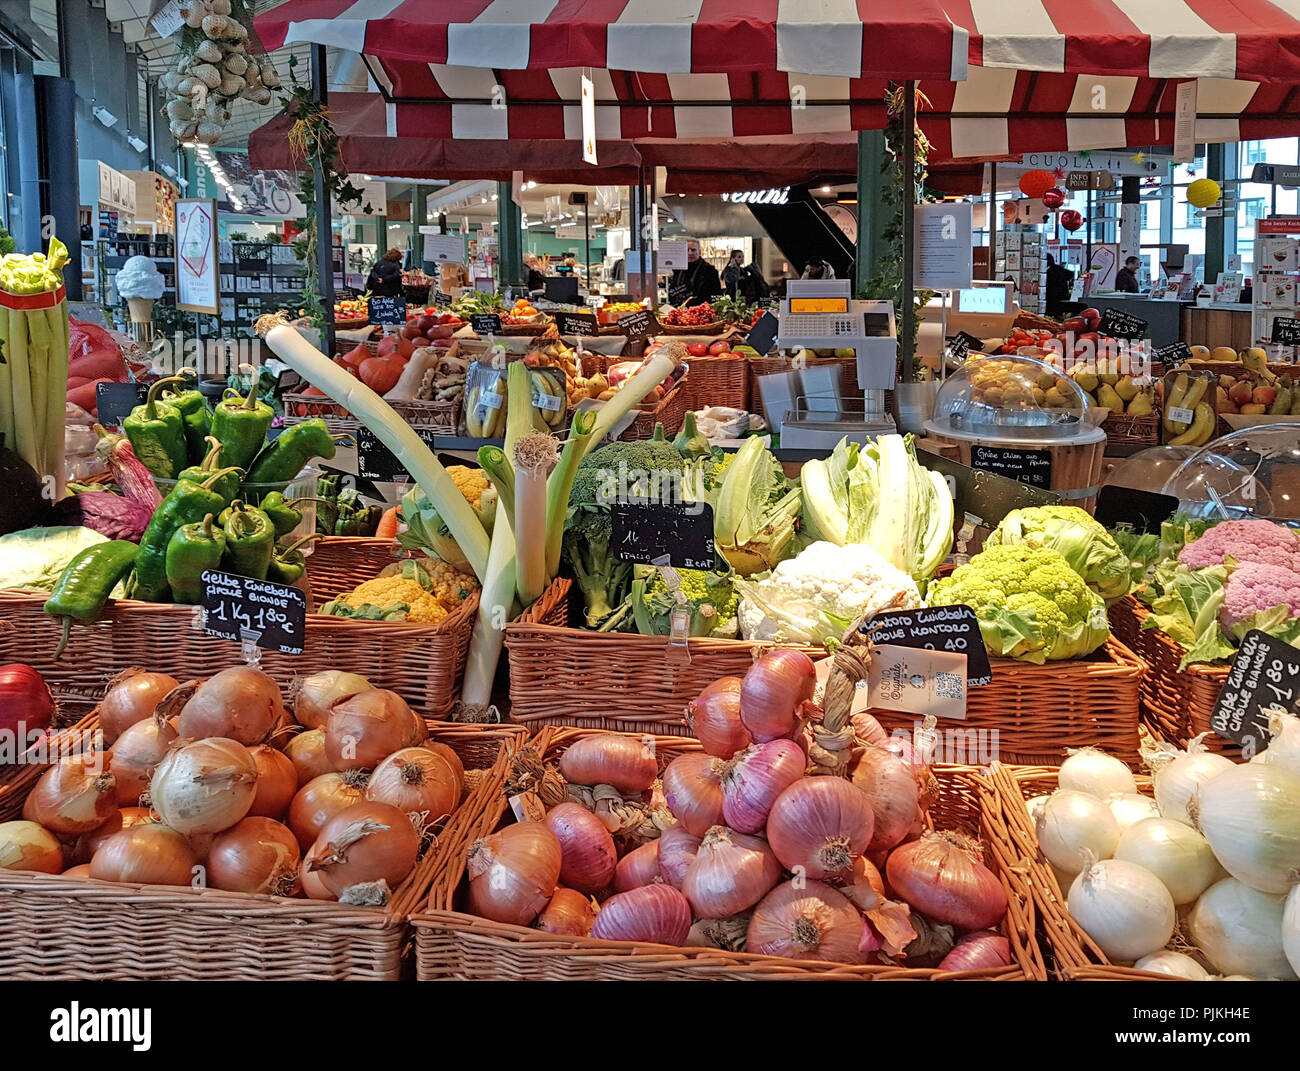 Market with vegetables and fruit Stock Photo